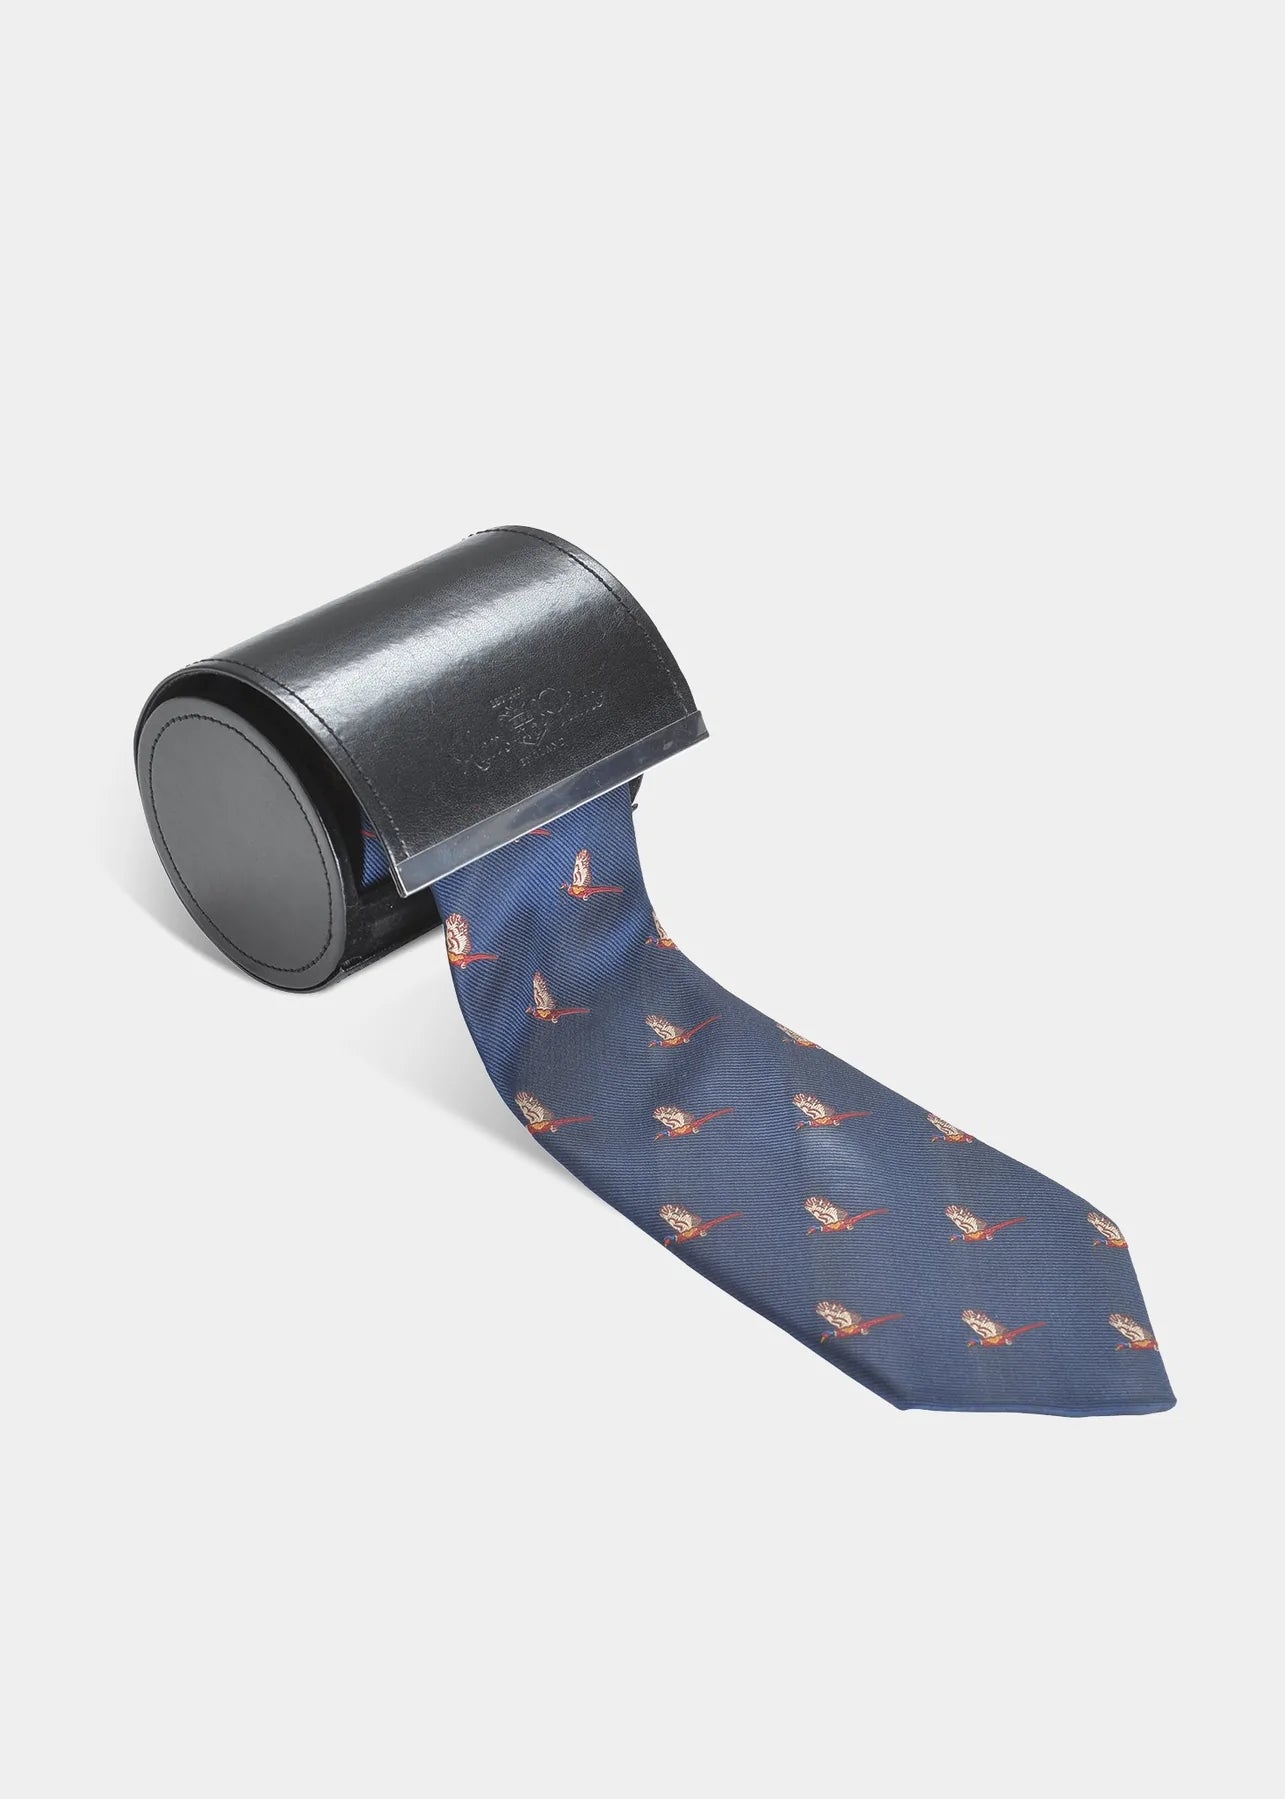 Ripon Silk Country Tie for Men with Flying Pheasant Design